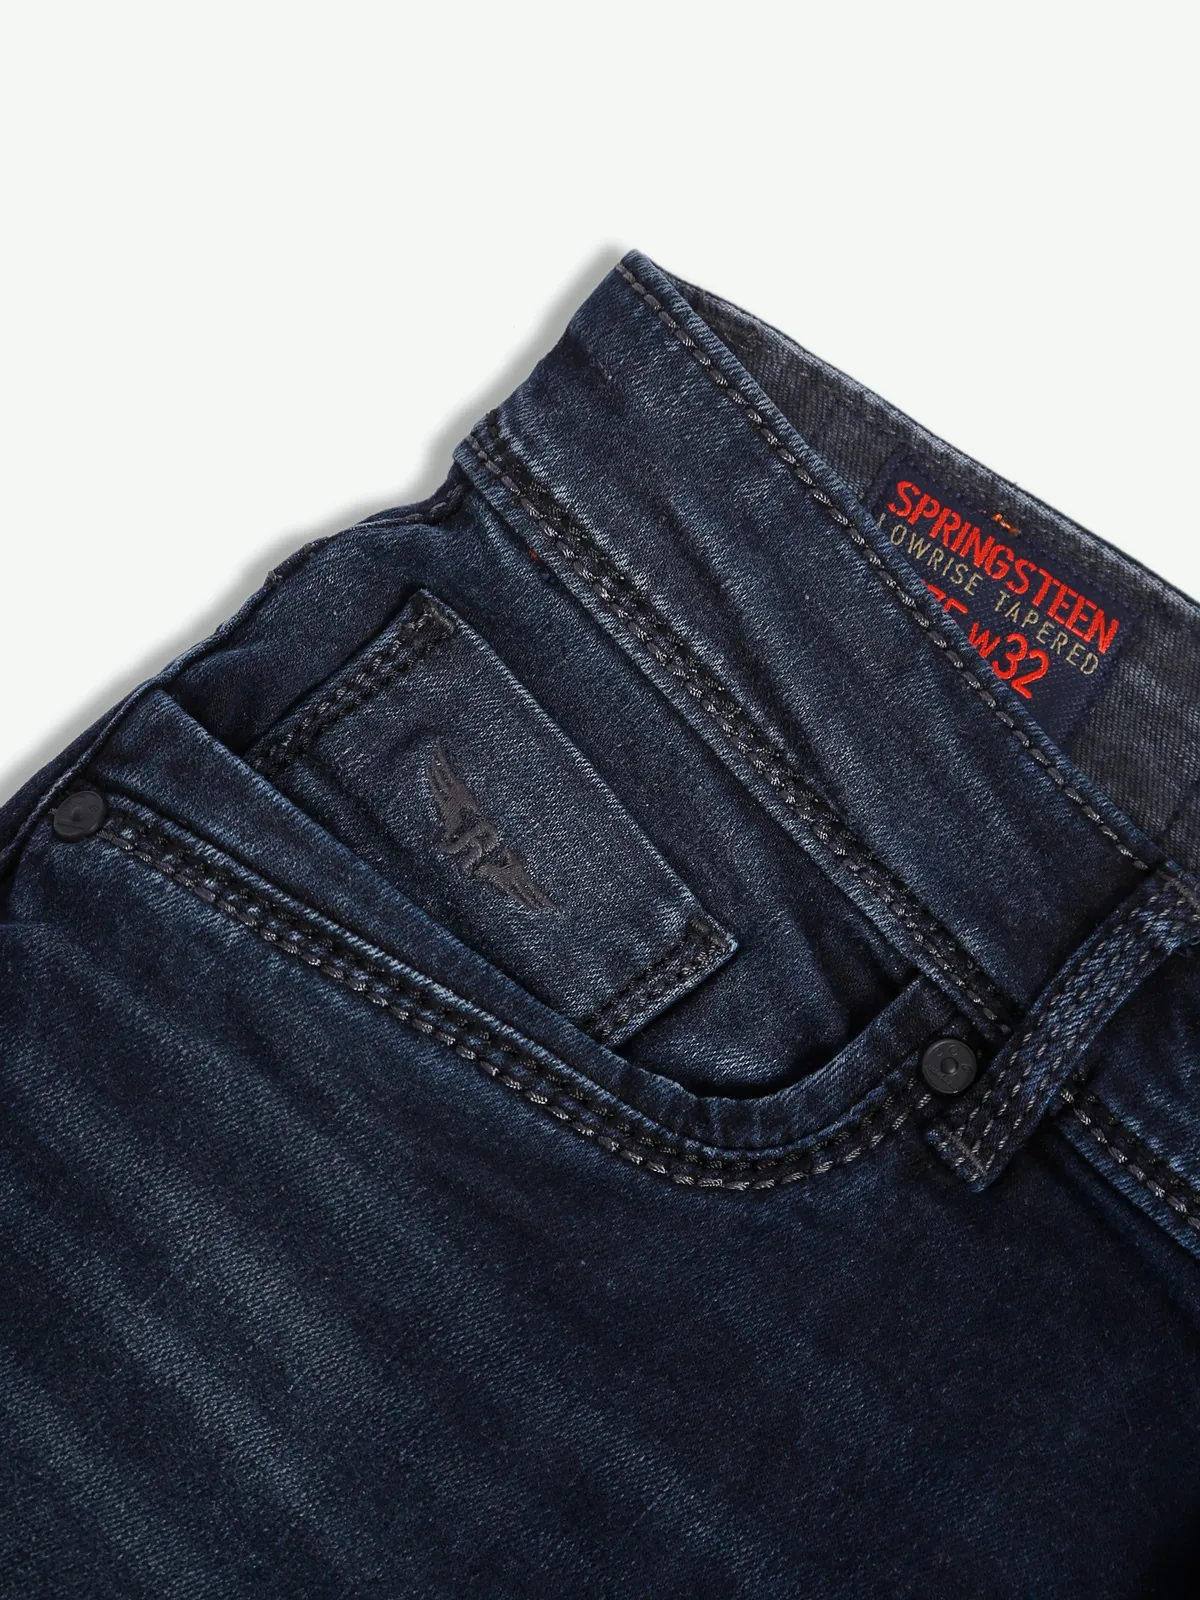 Rookies washed dark navy tapered fit jeans